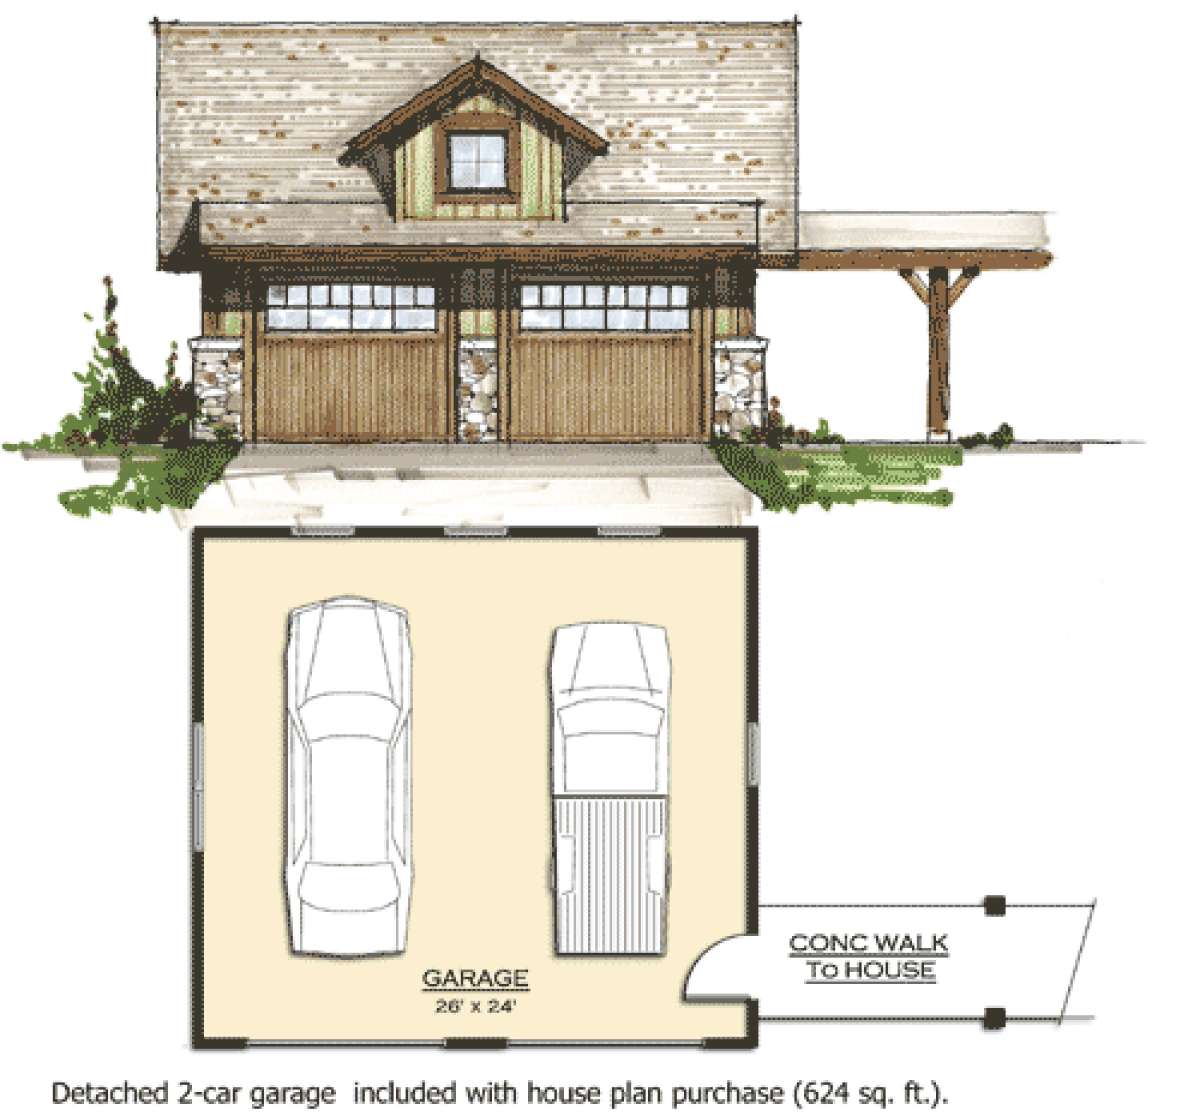 Garage for House Plan #8504-00052